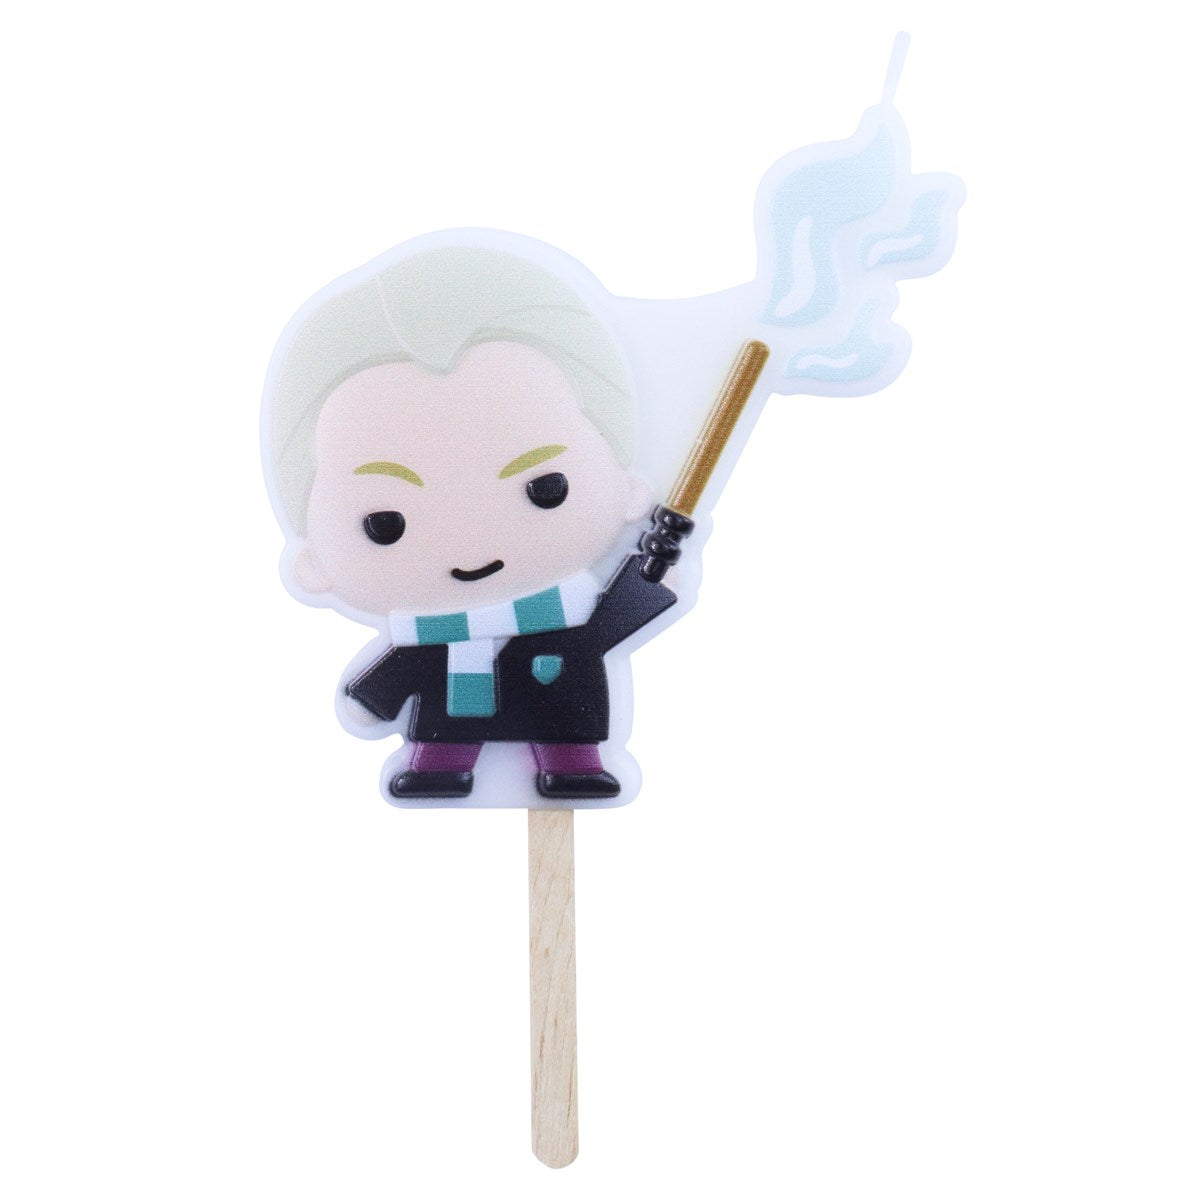 Bougie Personnage &quot;Draco Malfoy&quot;